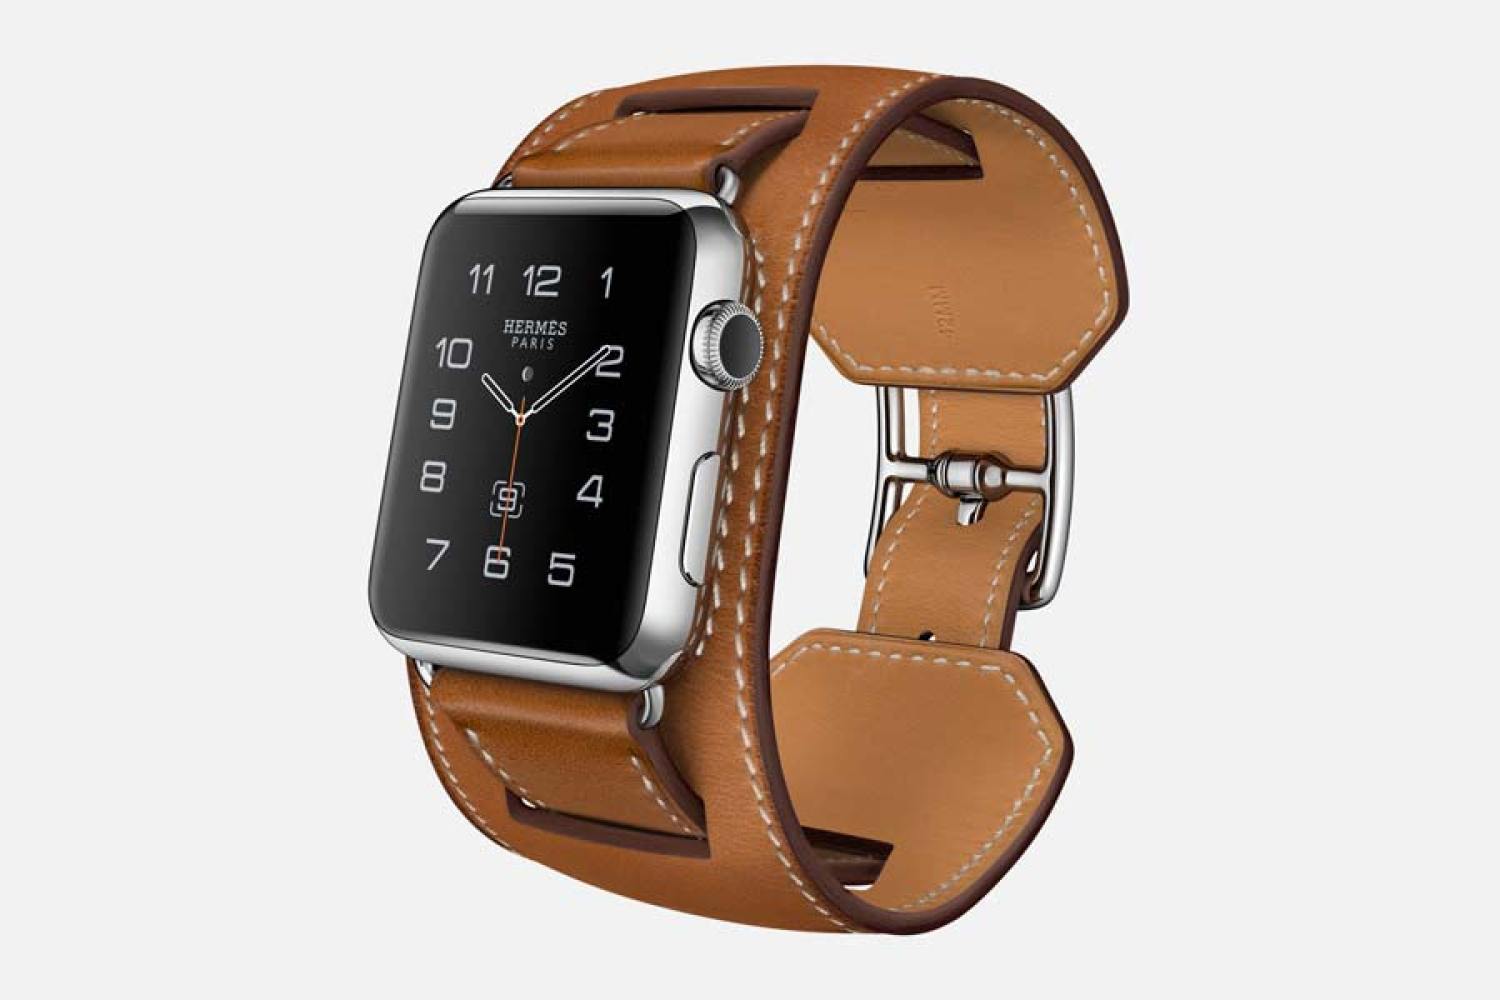 Hermès Launches Its Most Stylish Apple Watch Straps Yet—See Them